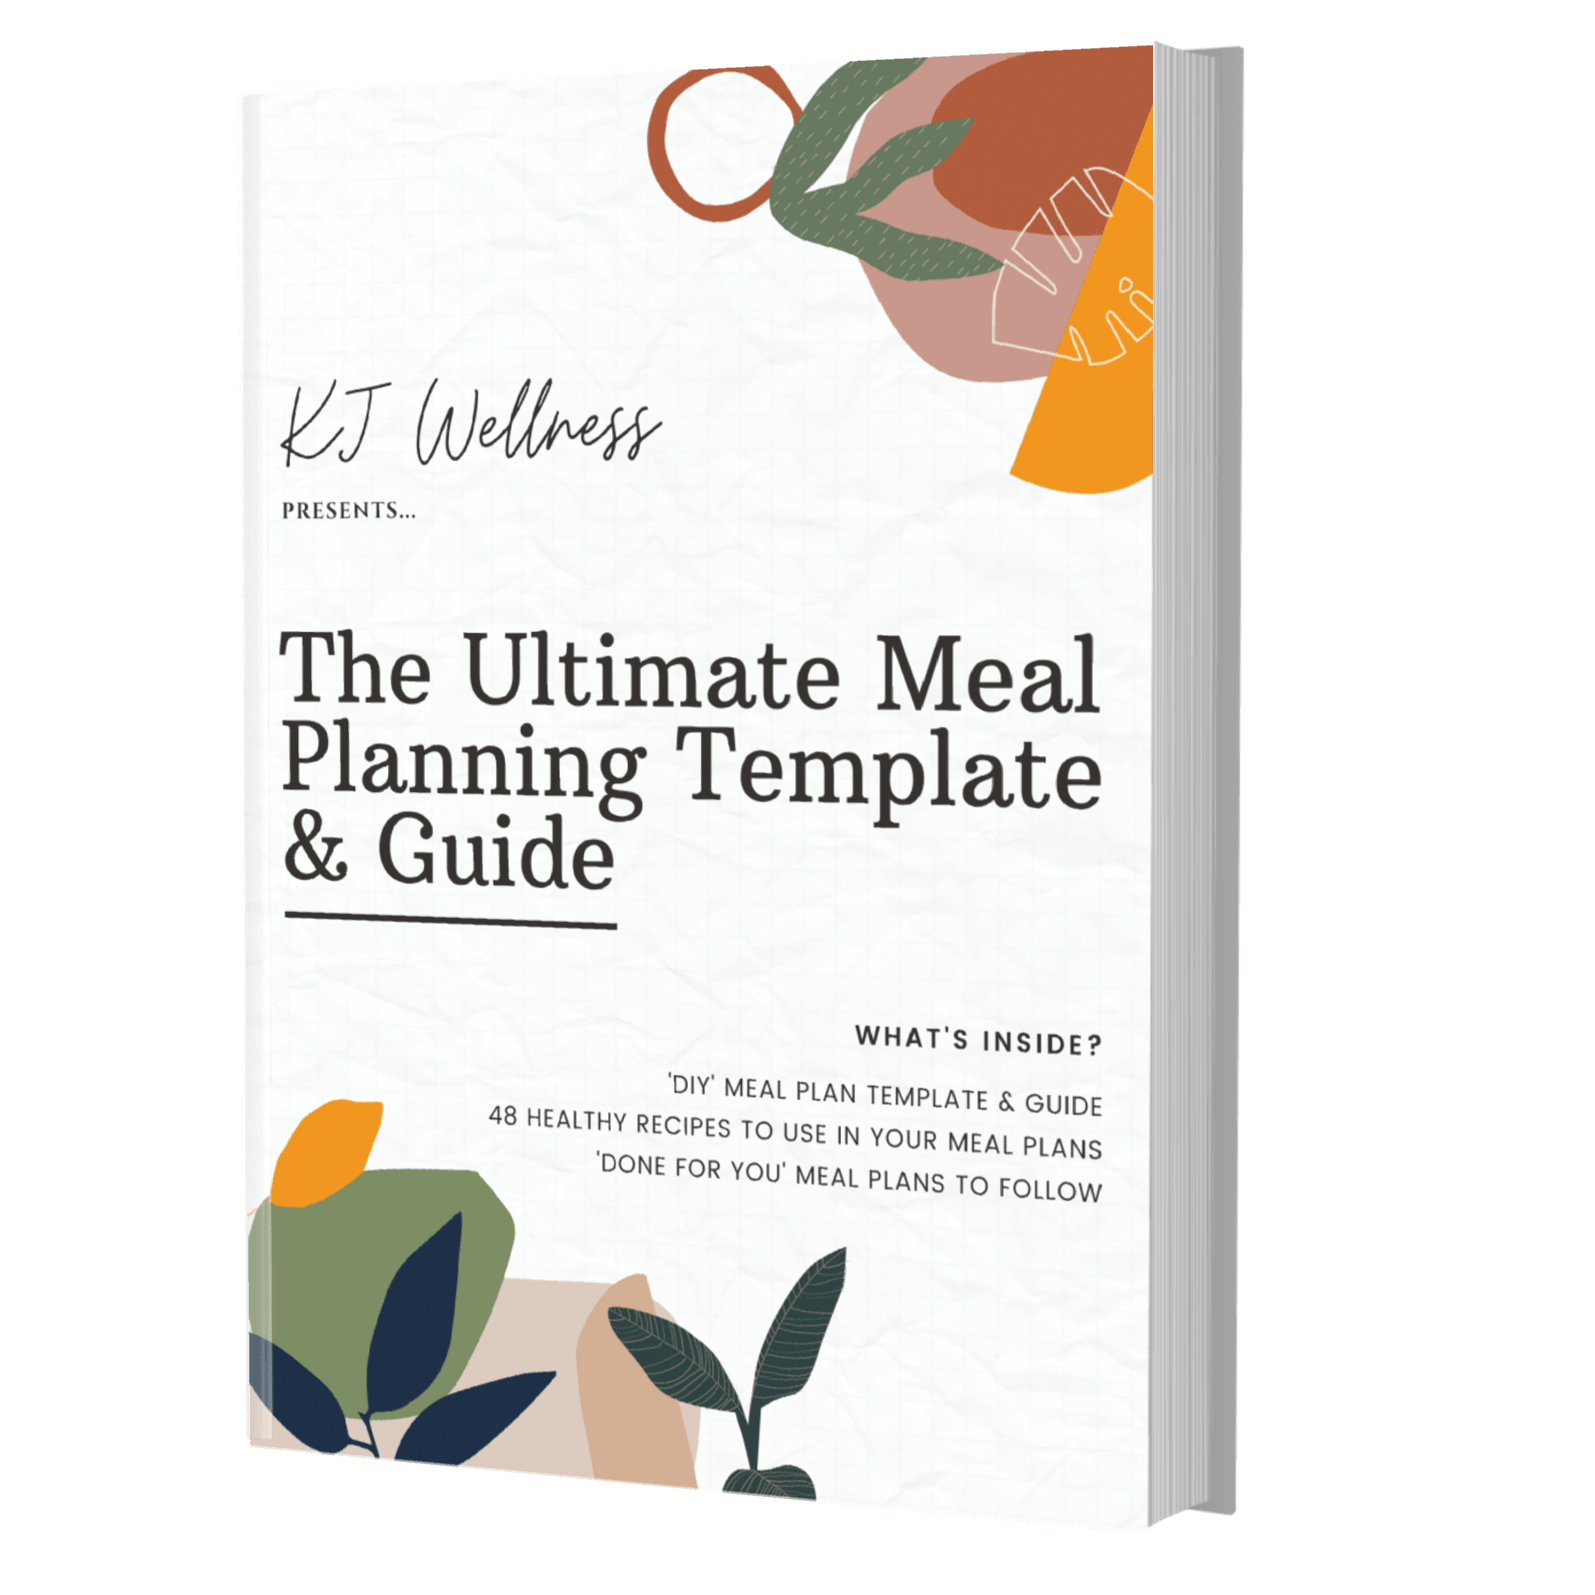 Meal Planning For Beginners (Meal Plan Template Inside!)